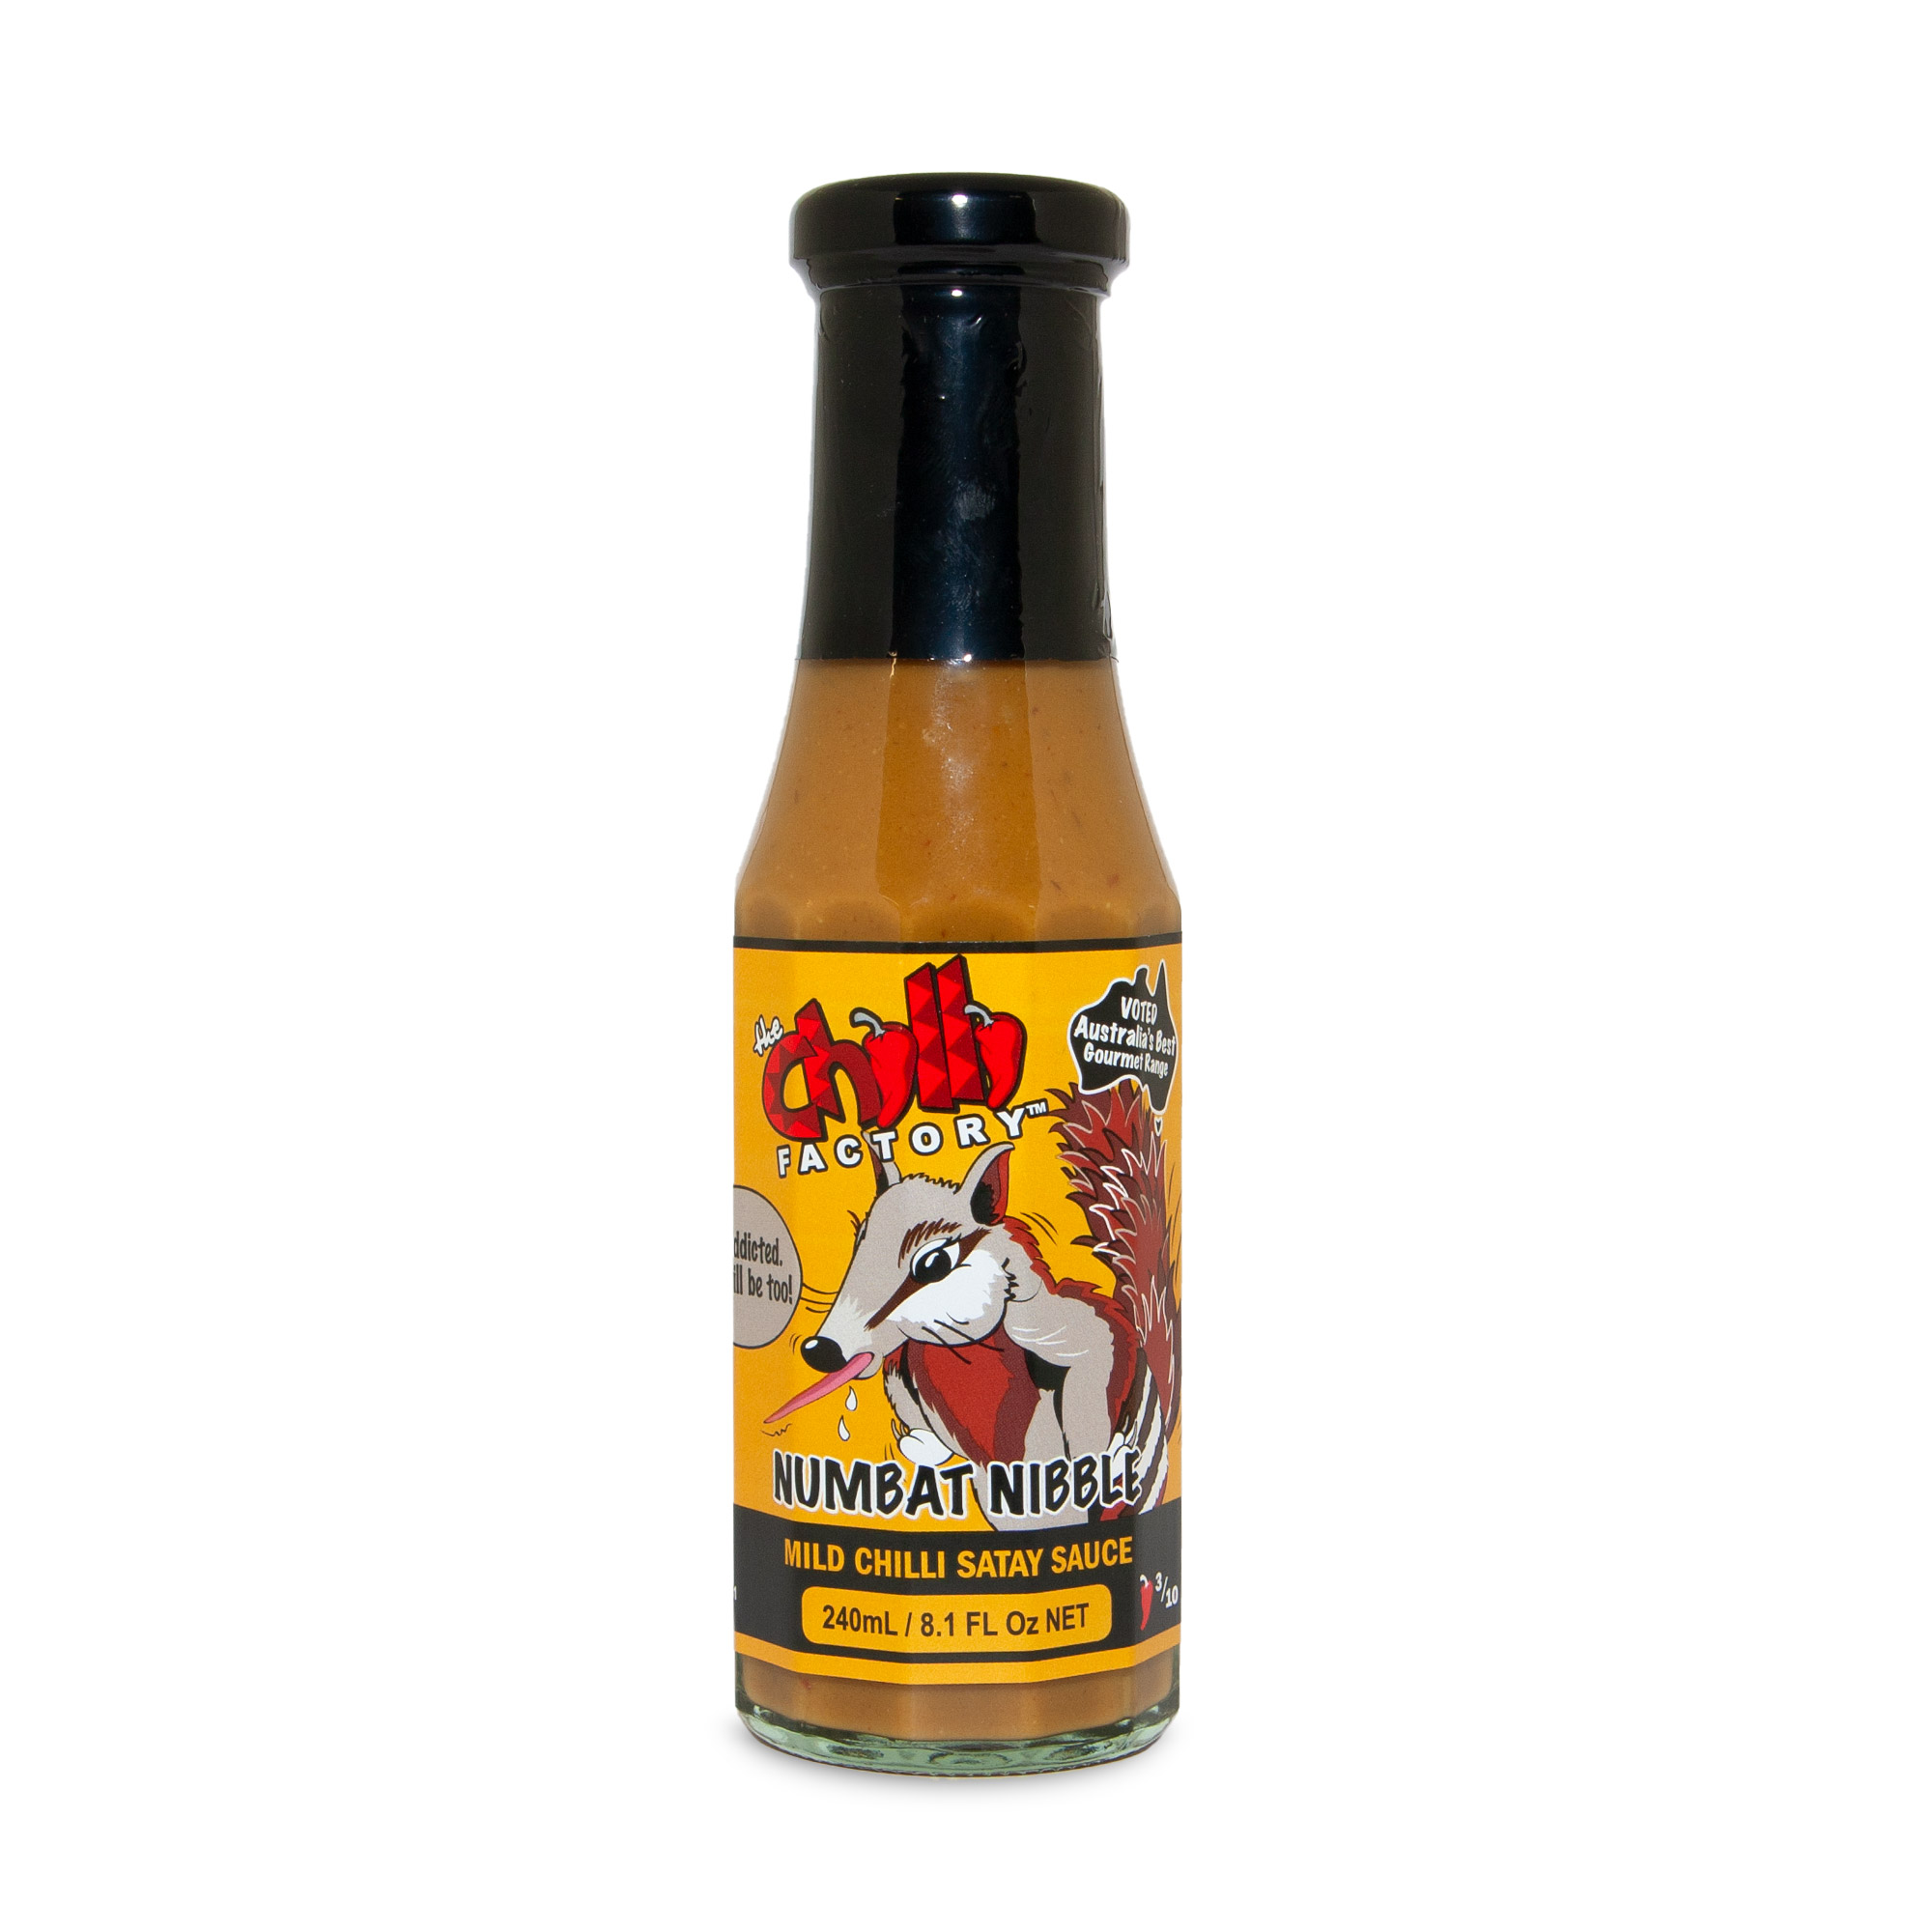 https://www.thechillifactory.com/chilli-sauce/numbat-nibble